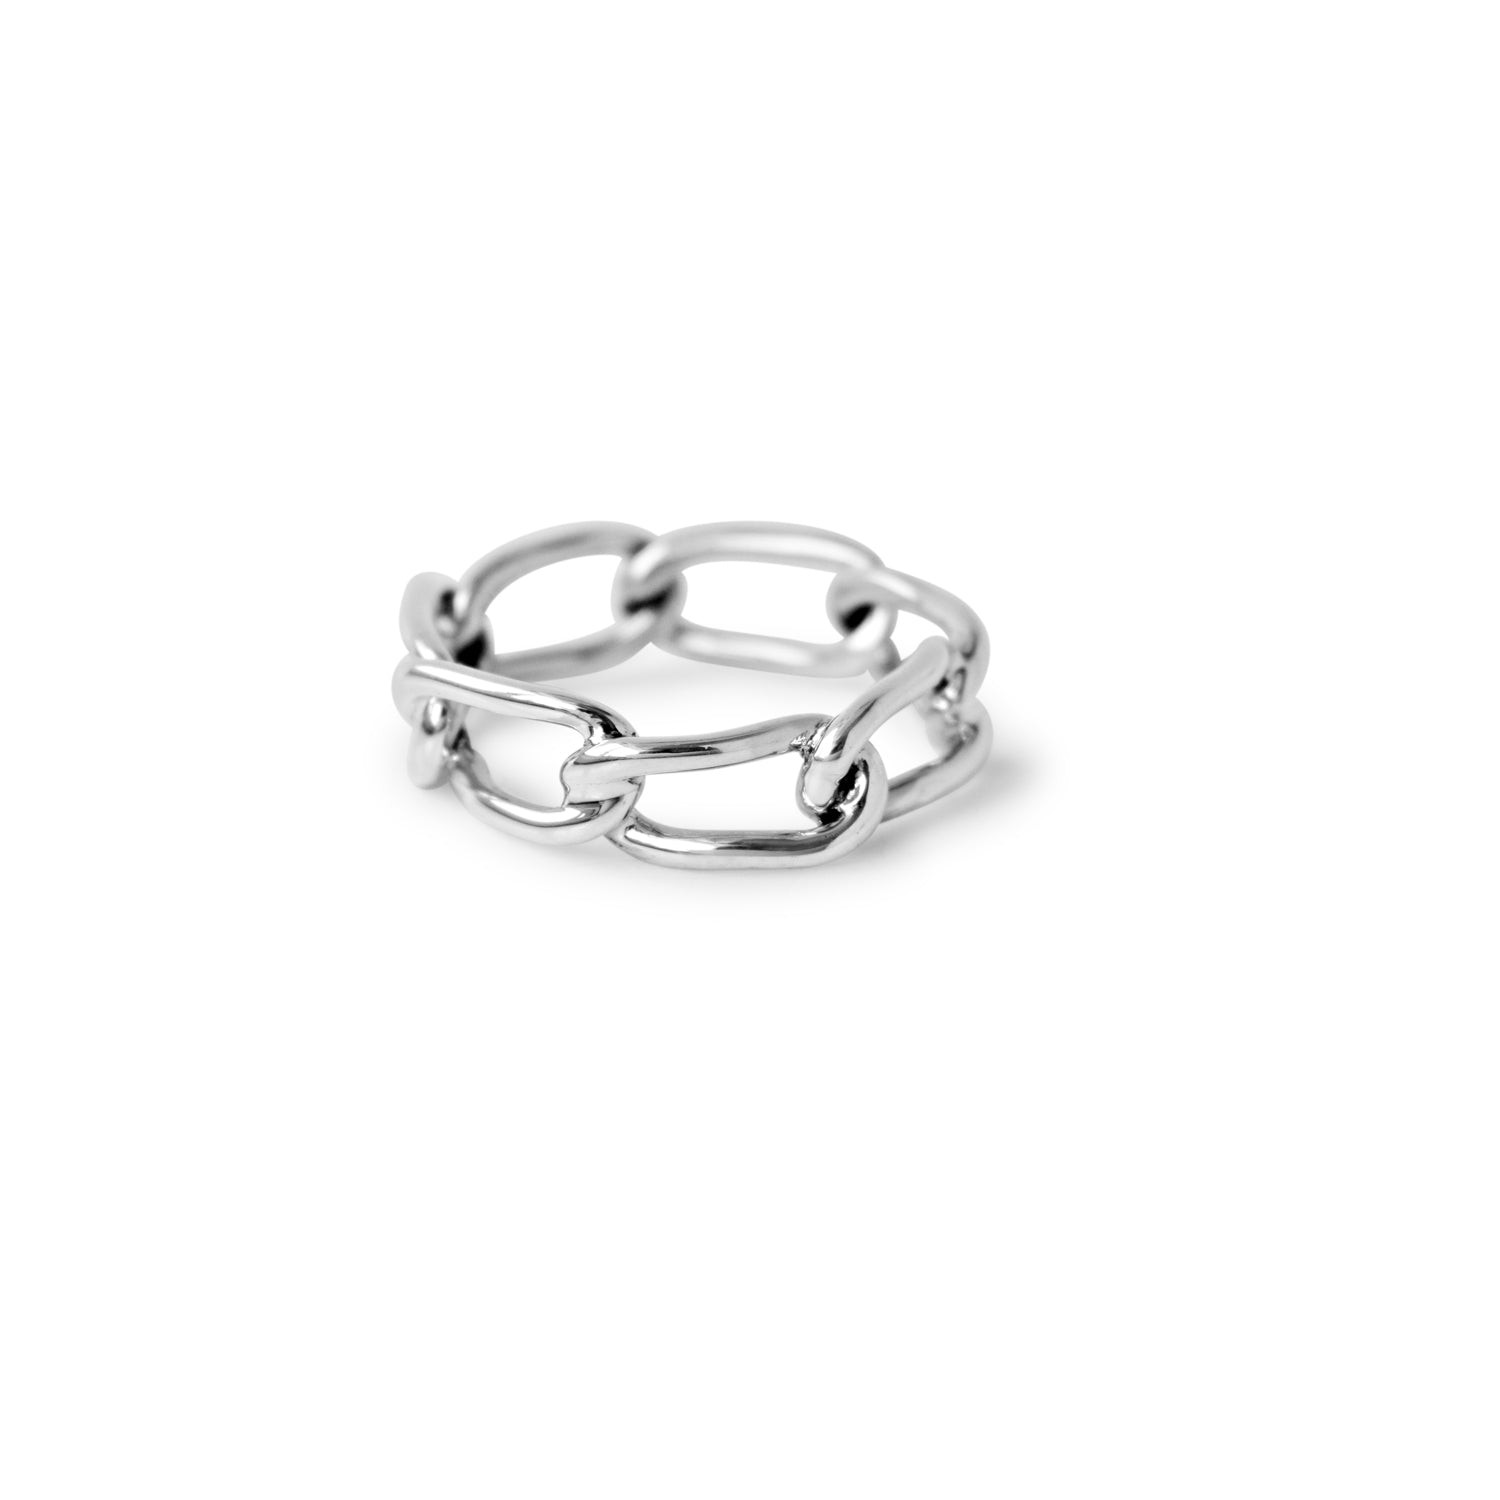 Succession Chainlink Ring - Lissa Bowie